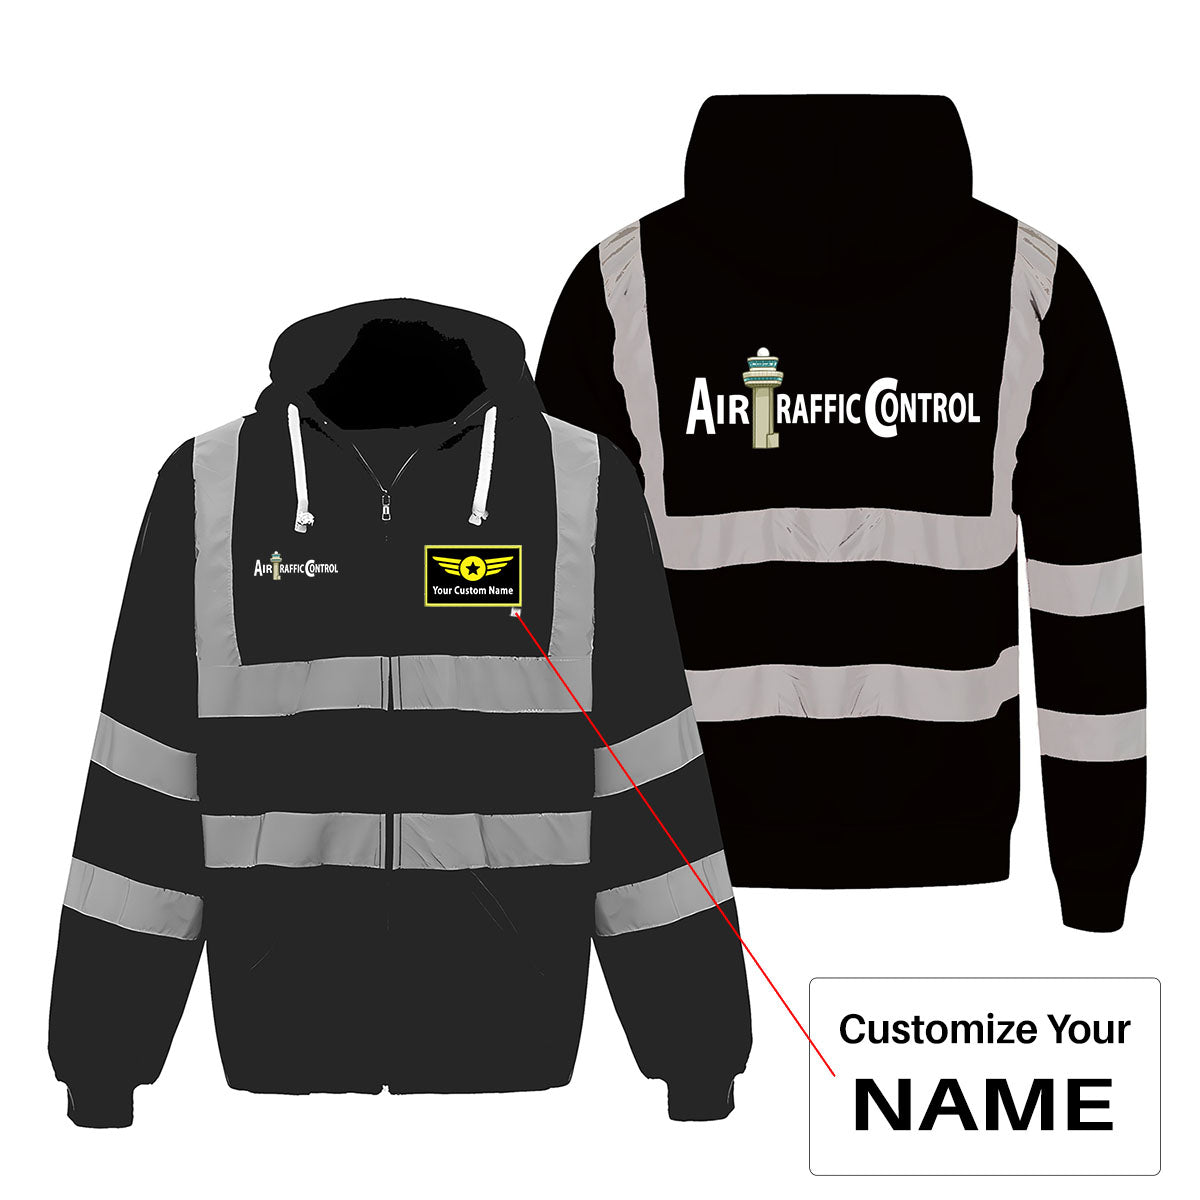 Air Traffic Control Designed Reflective Zipped Hoodies